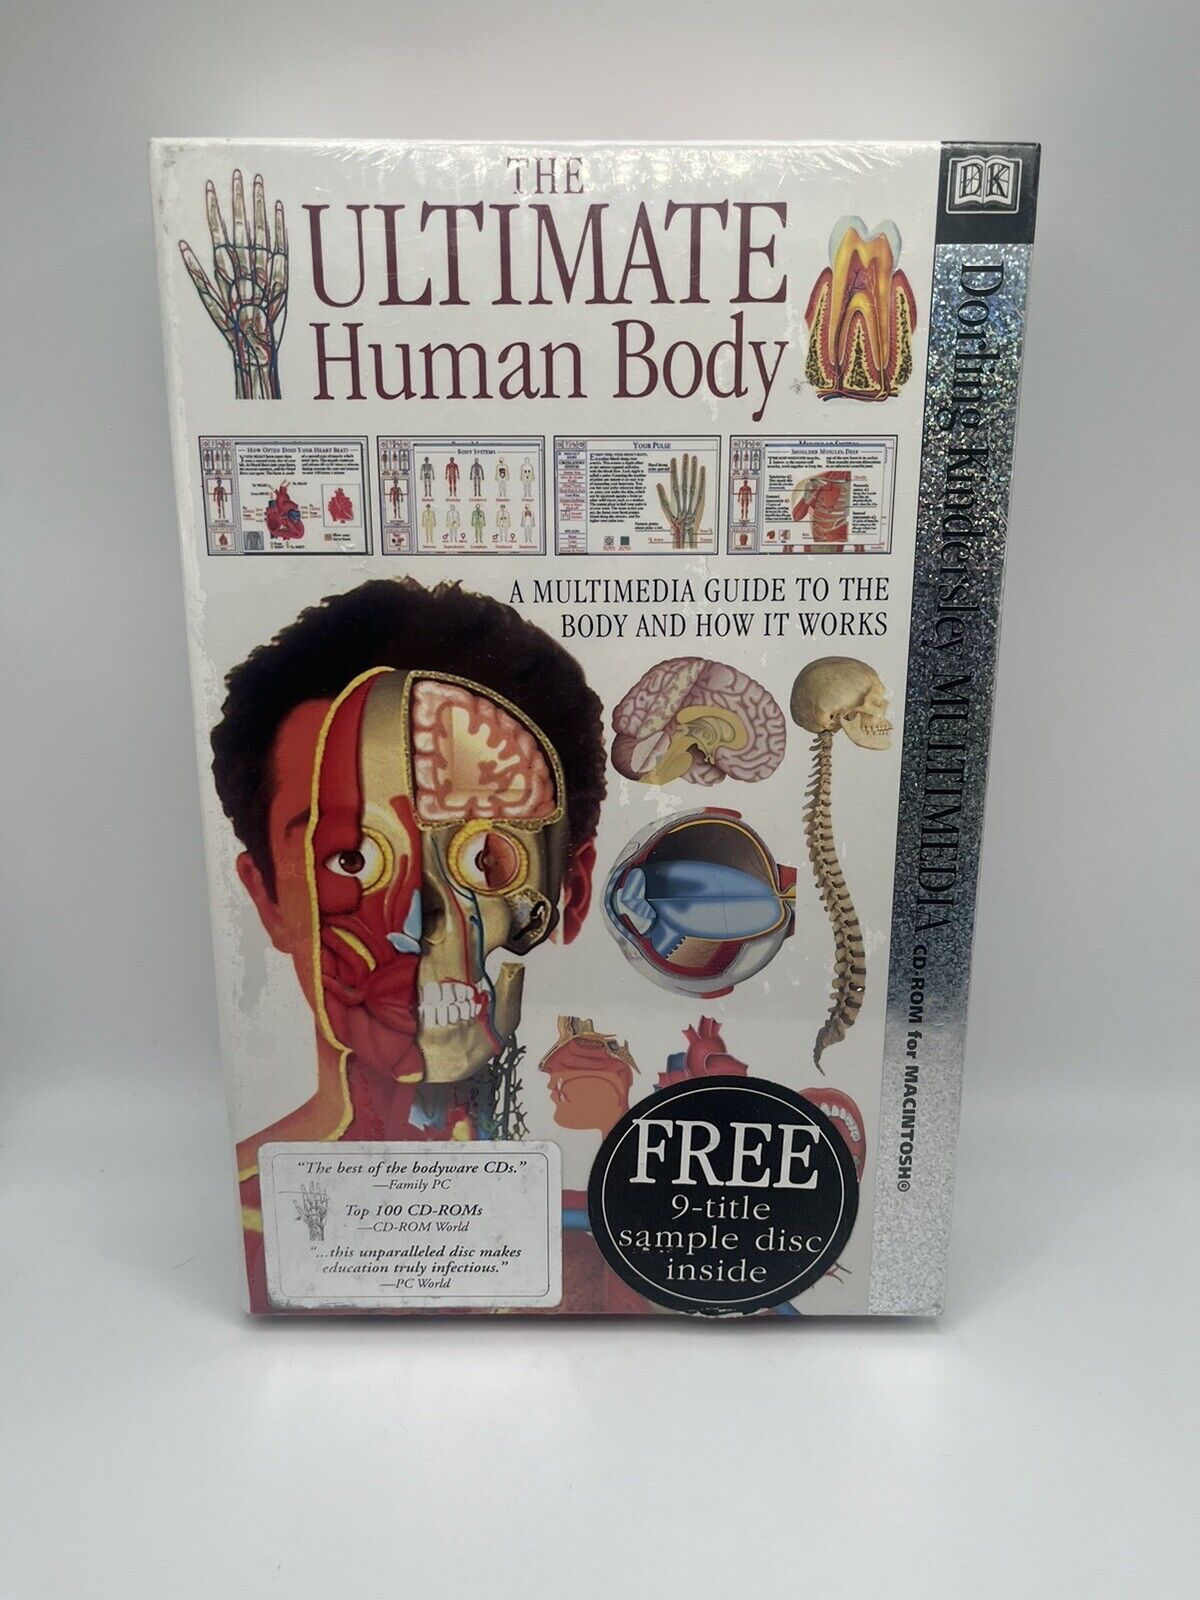 THE ULTIMATE HUMAN BODY CD-ROM for MACINTOSH Multimedia Guide 1995 DK SEALED